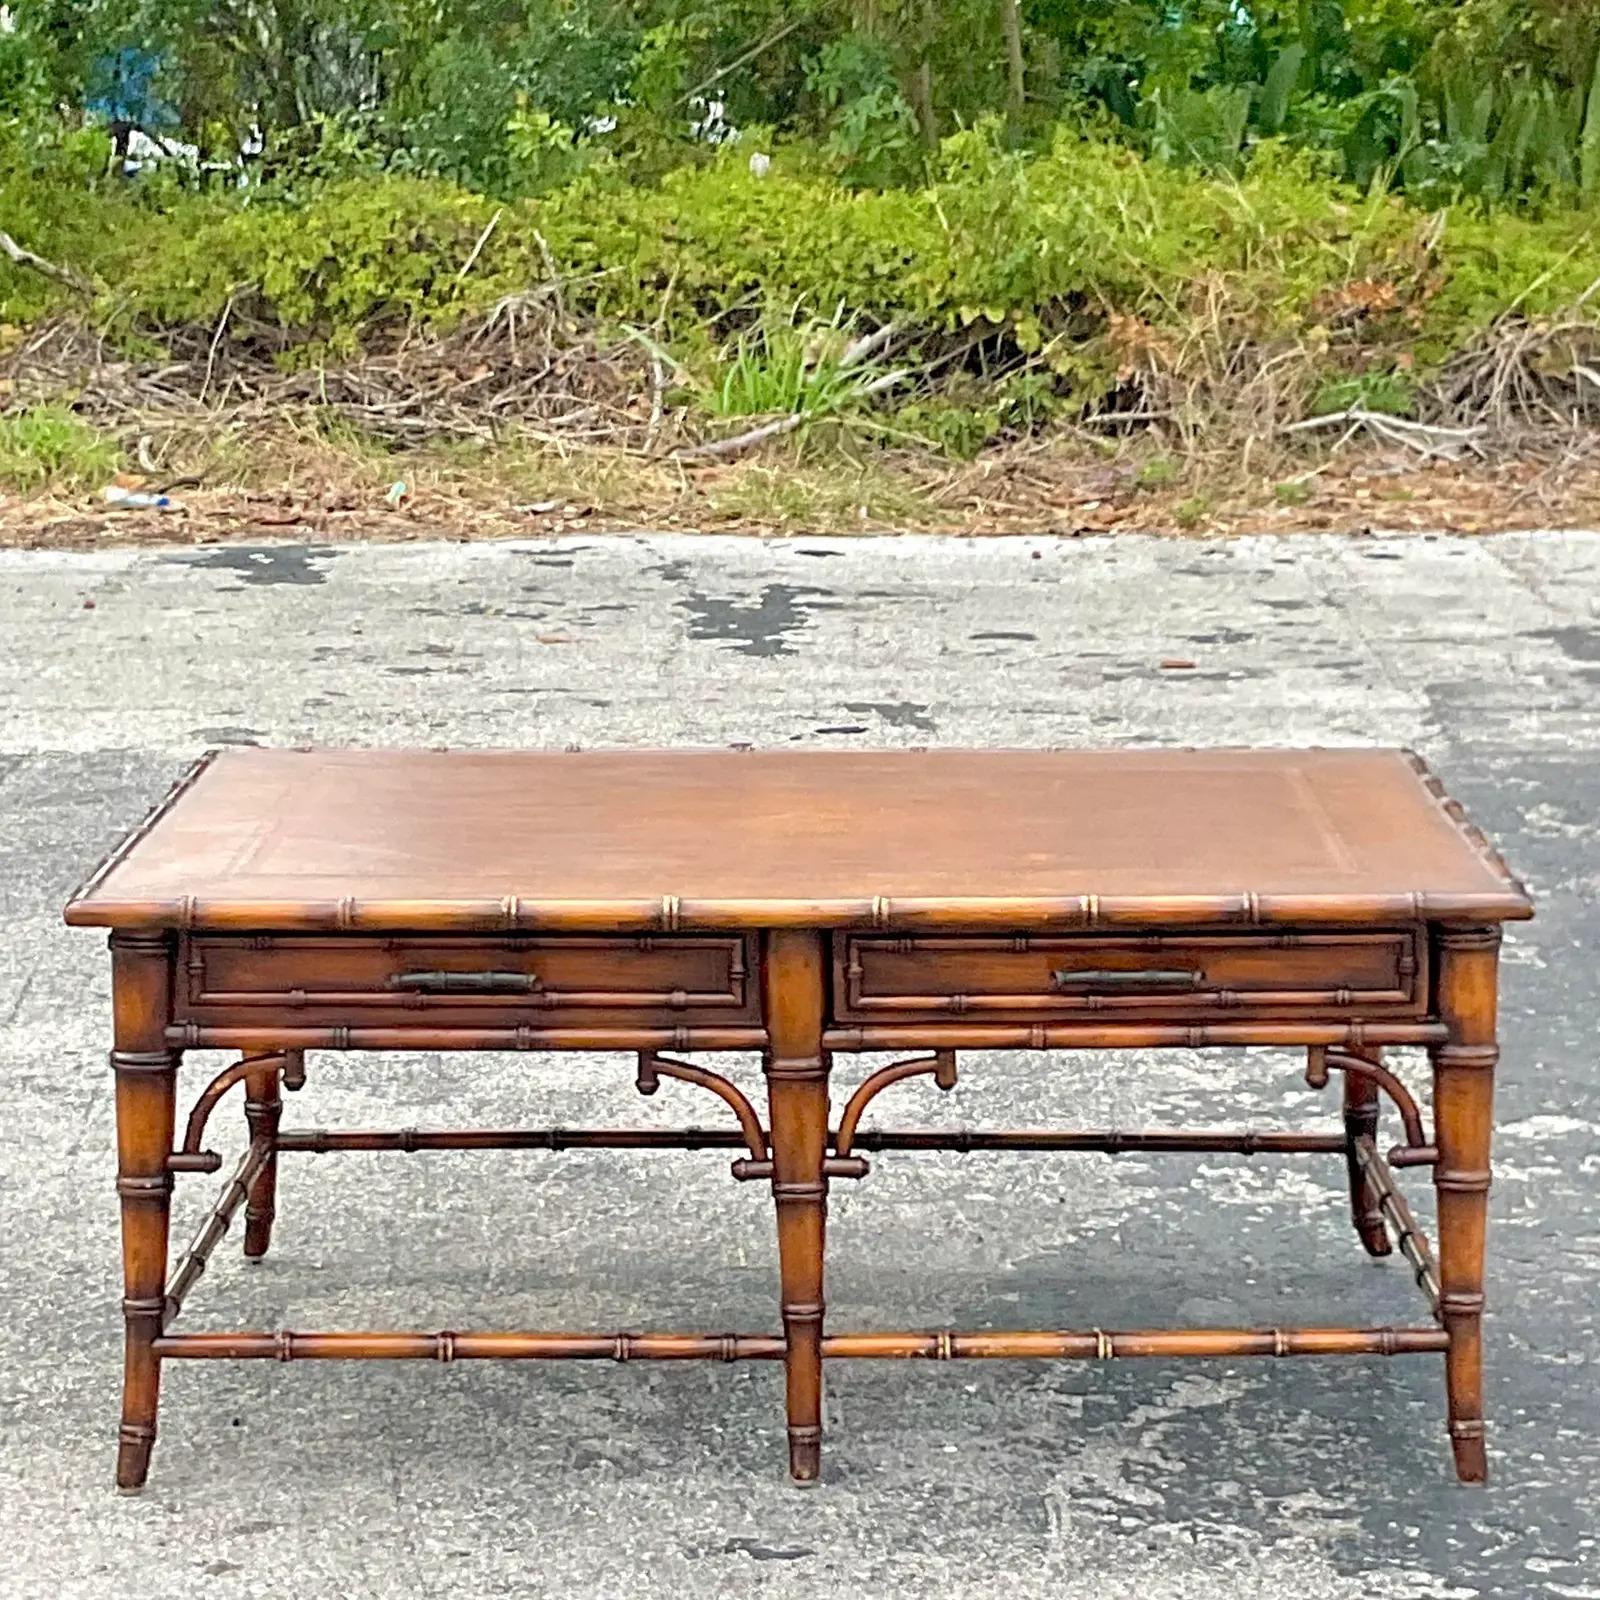 A stunning vintage Coastal coffee table. A chic faux bamboo trim with a wide surface and embossed leather top. Gorgeous fretwork detail along the edge. Acquired from a Palm Beach estate.

The table is in great vintage condition. Minor scuffs and